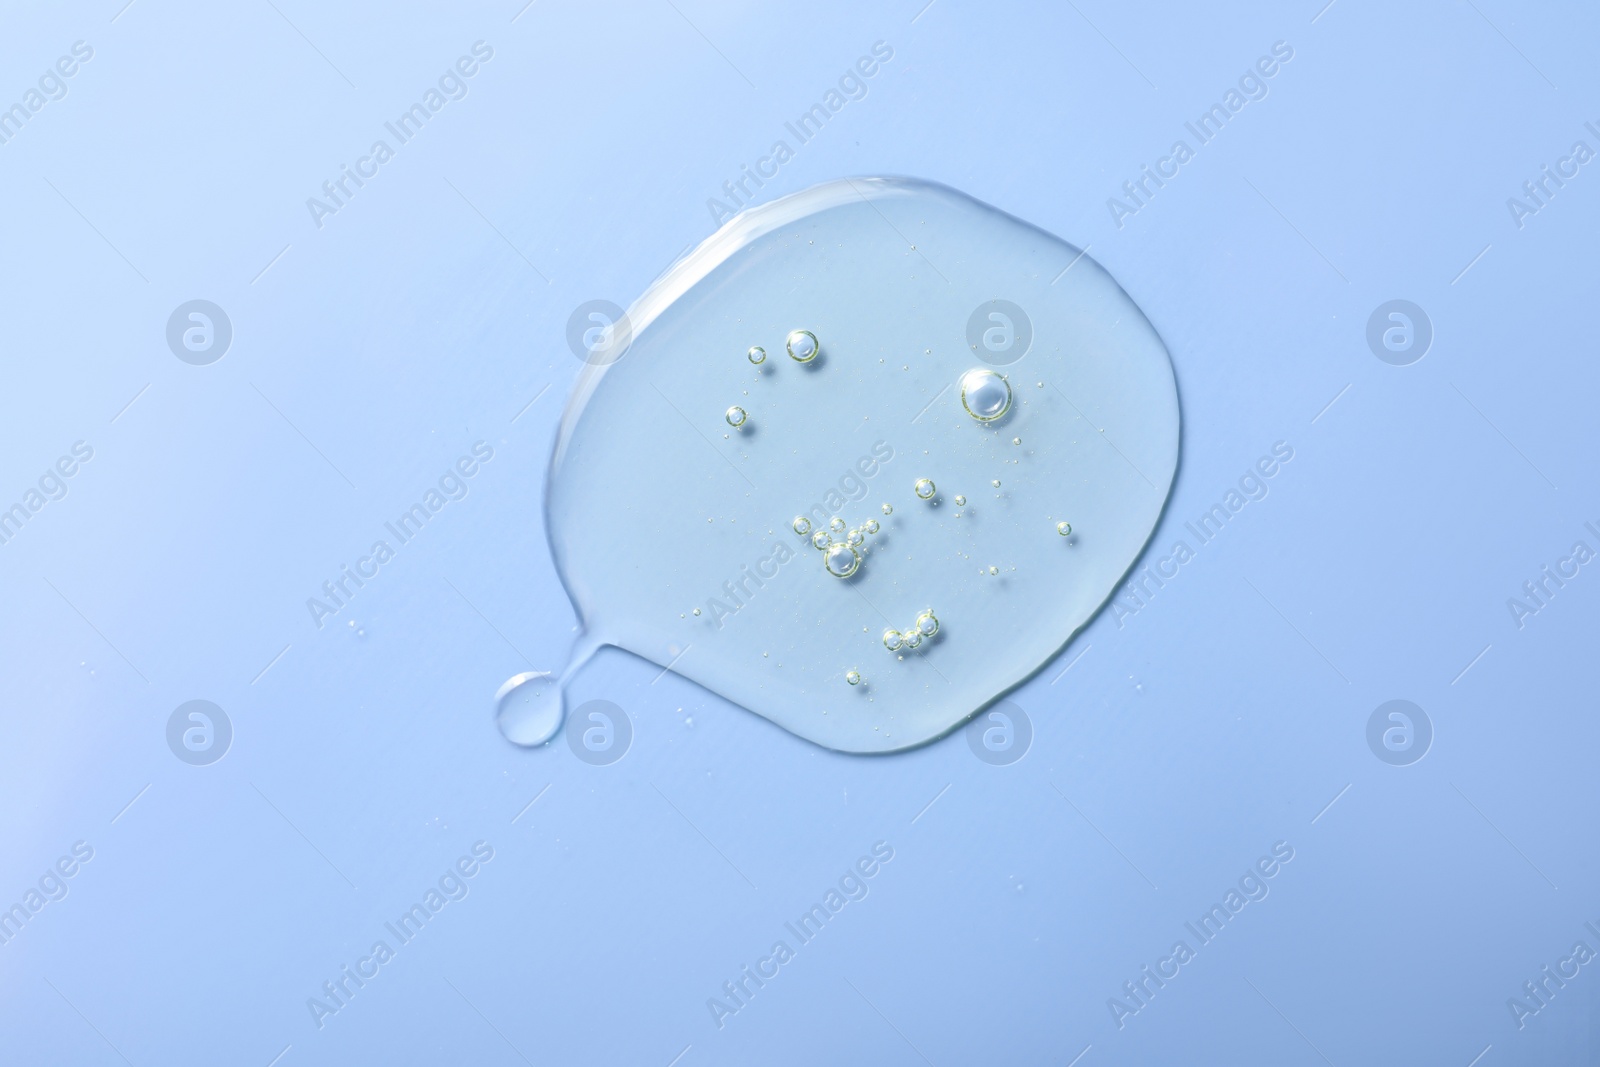 Photo of Drop of hydrophilic oil on light blue background, top view